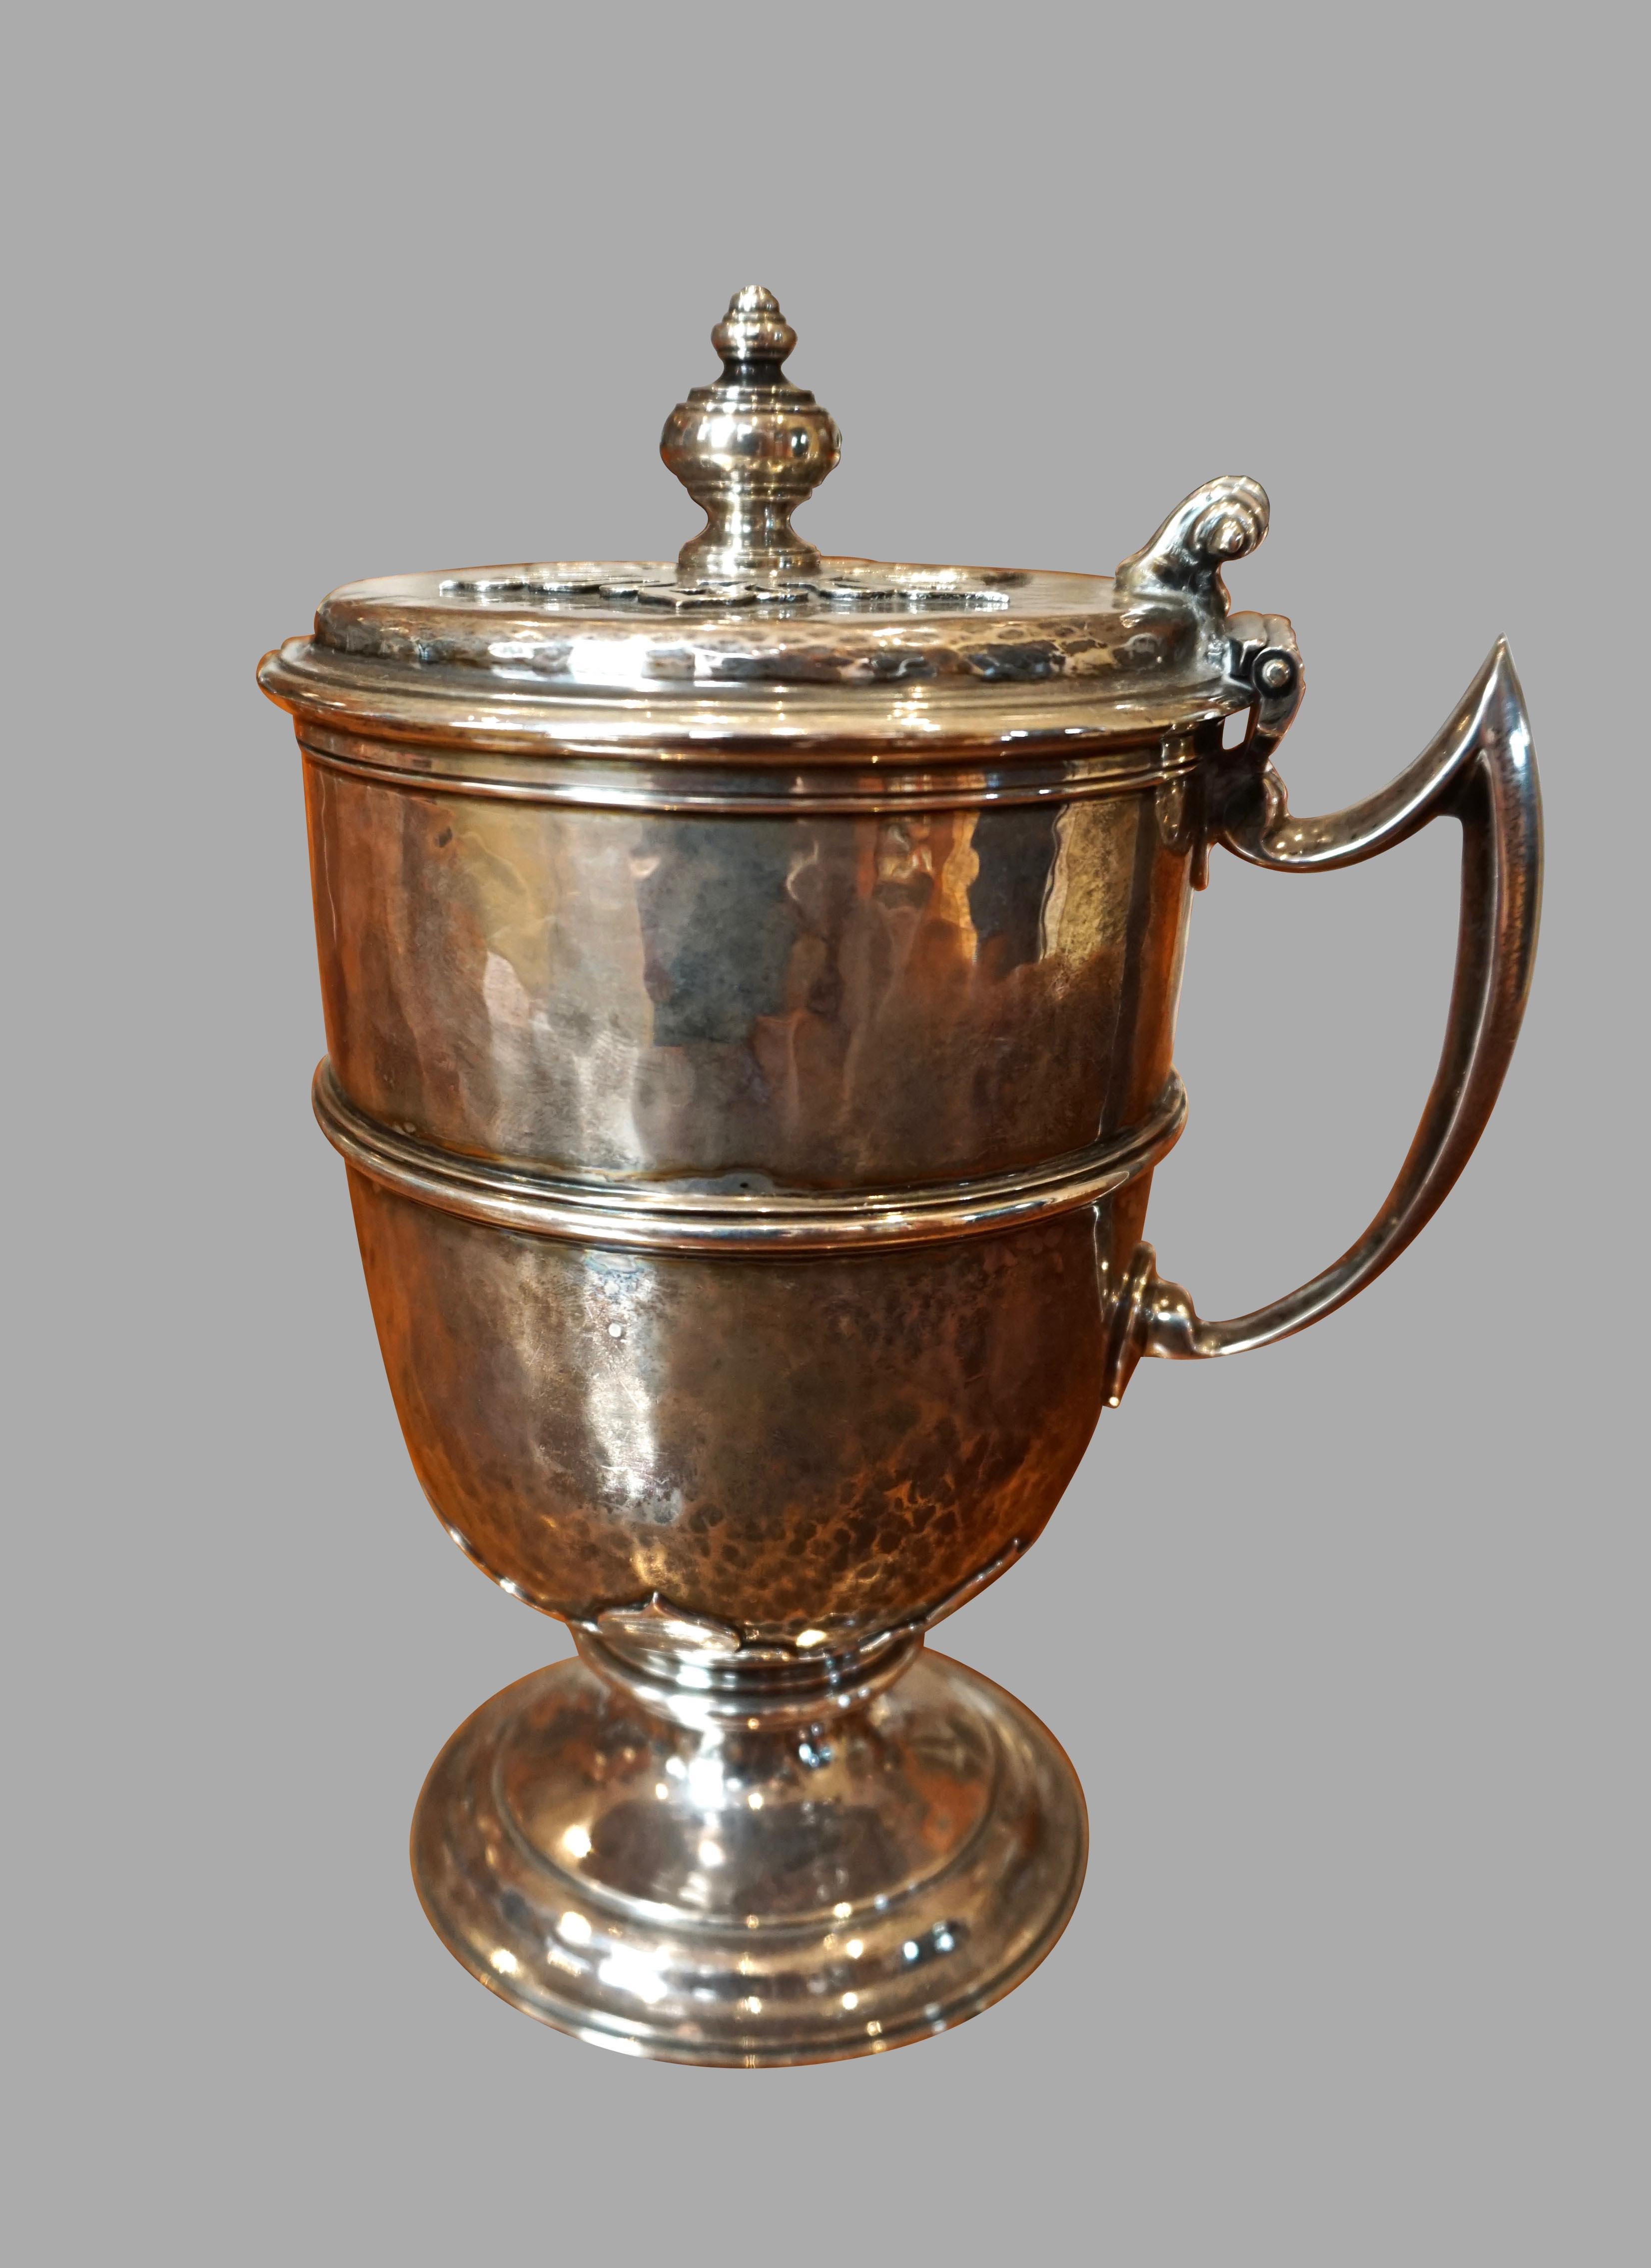 An English sterling silver covered handled cup hallmarked for London 1911, made and stamped by Johnson Walker & Tolhurst.  Weight is 19 troy ounces.